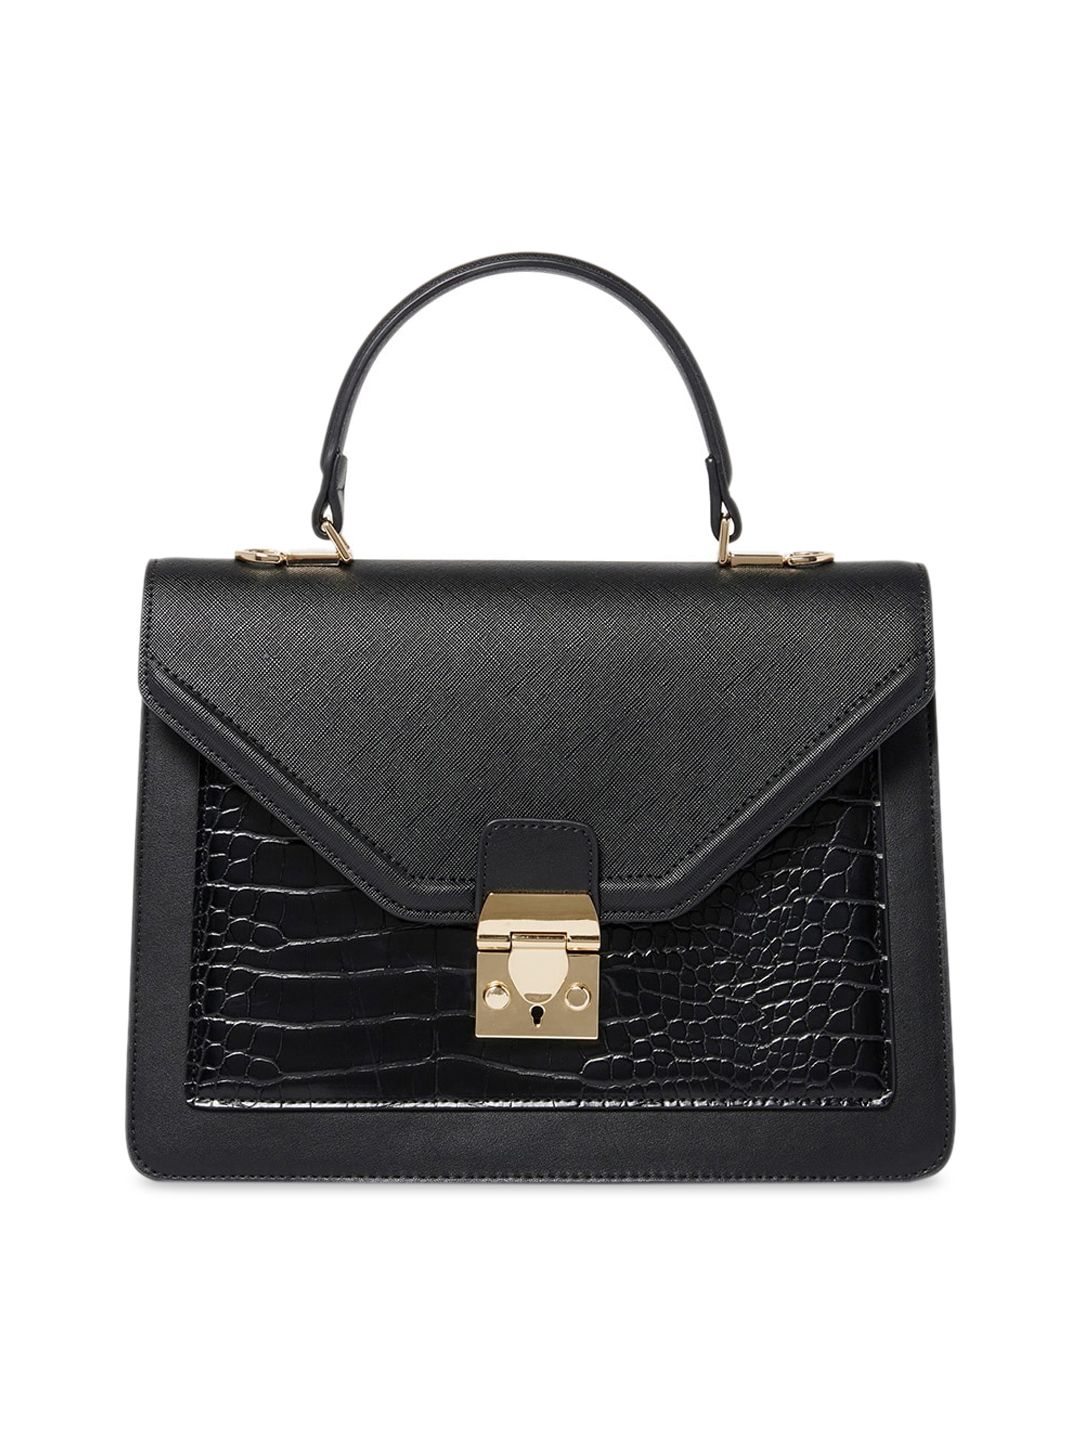 Forever New Black Animal Textured PU Structured Satchel with Cut Work Price in India